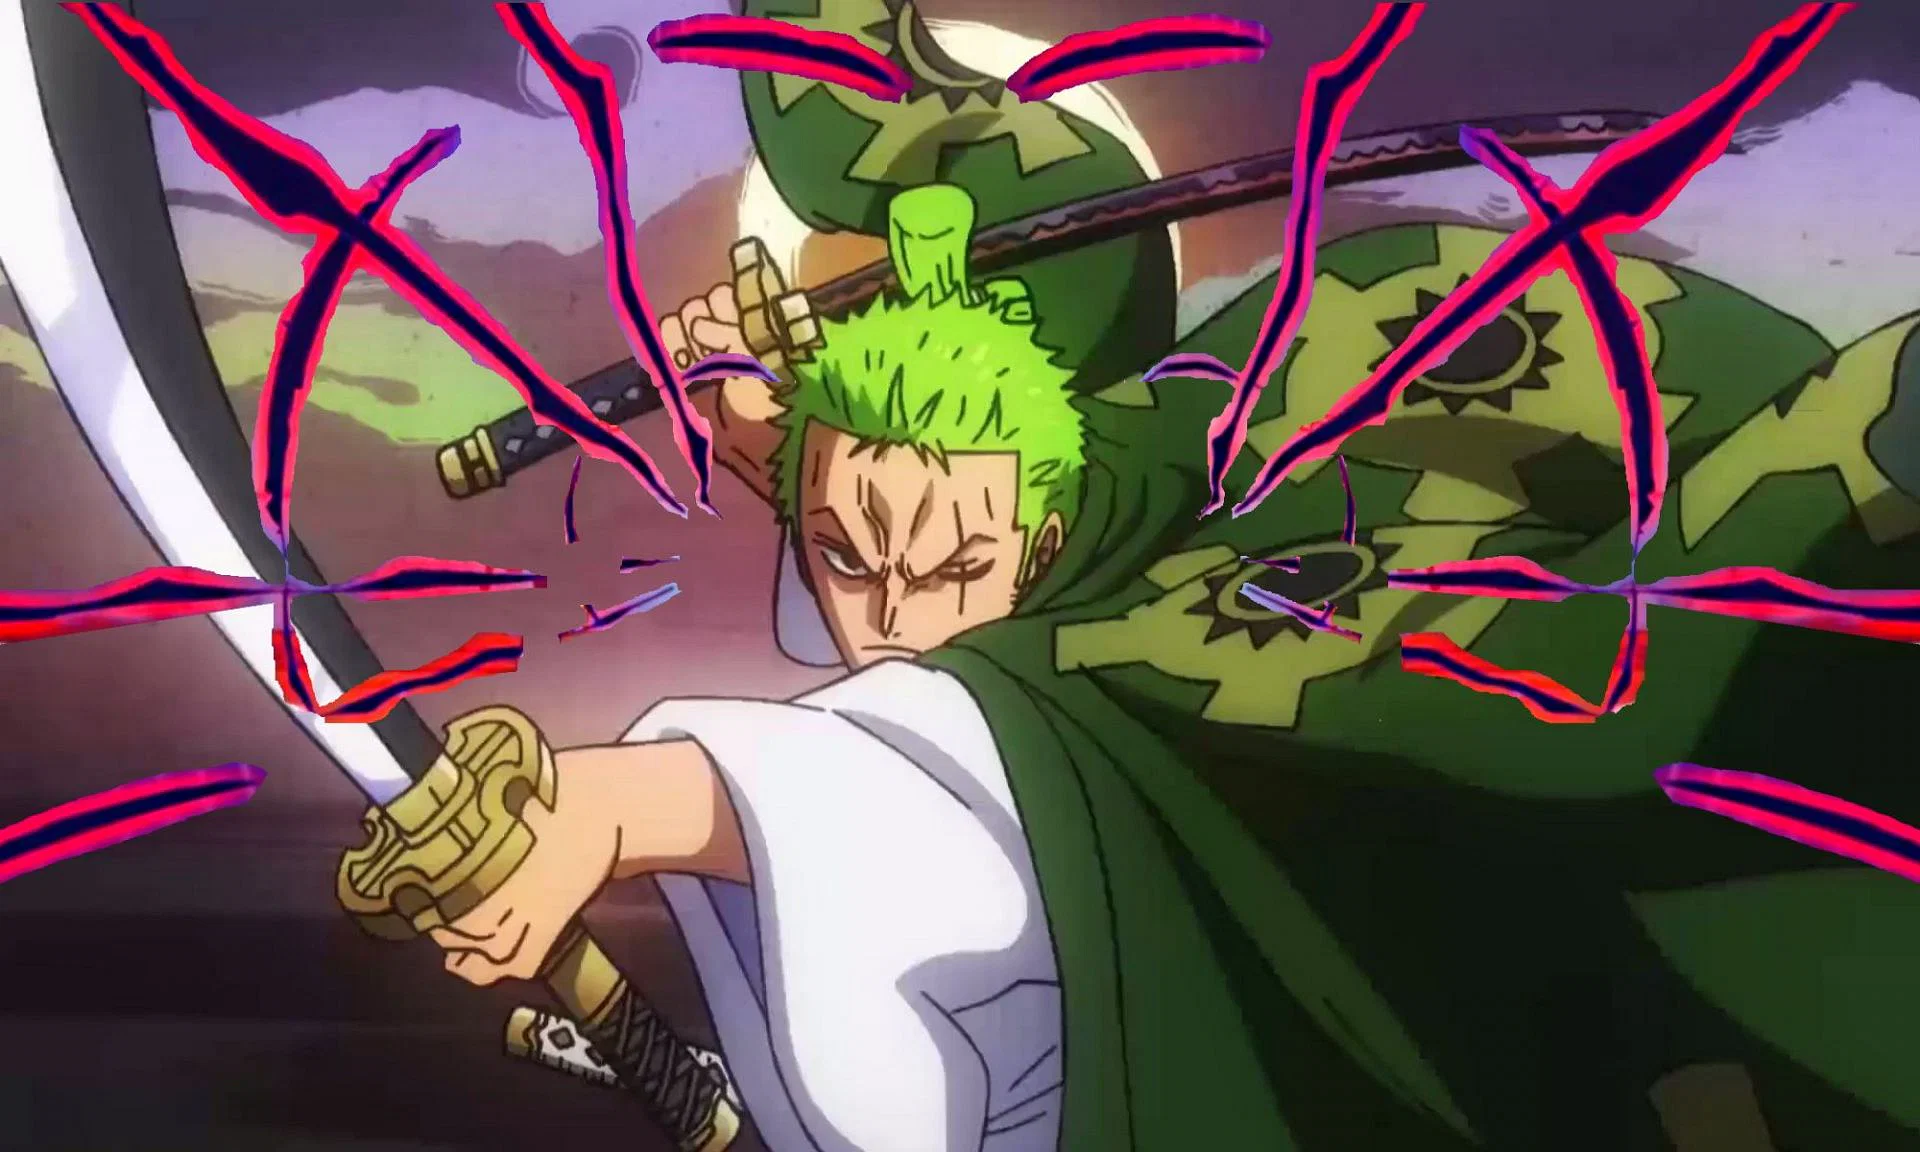 Breaking: Exclusive Deep Dive Reveals Unknown Facts About One Piece's Fan-Favorite, Roronoa Zoro